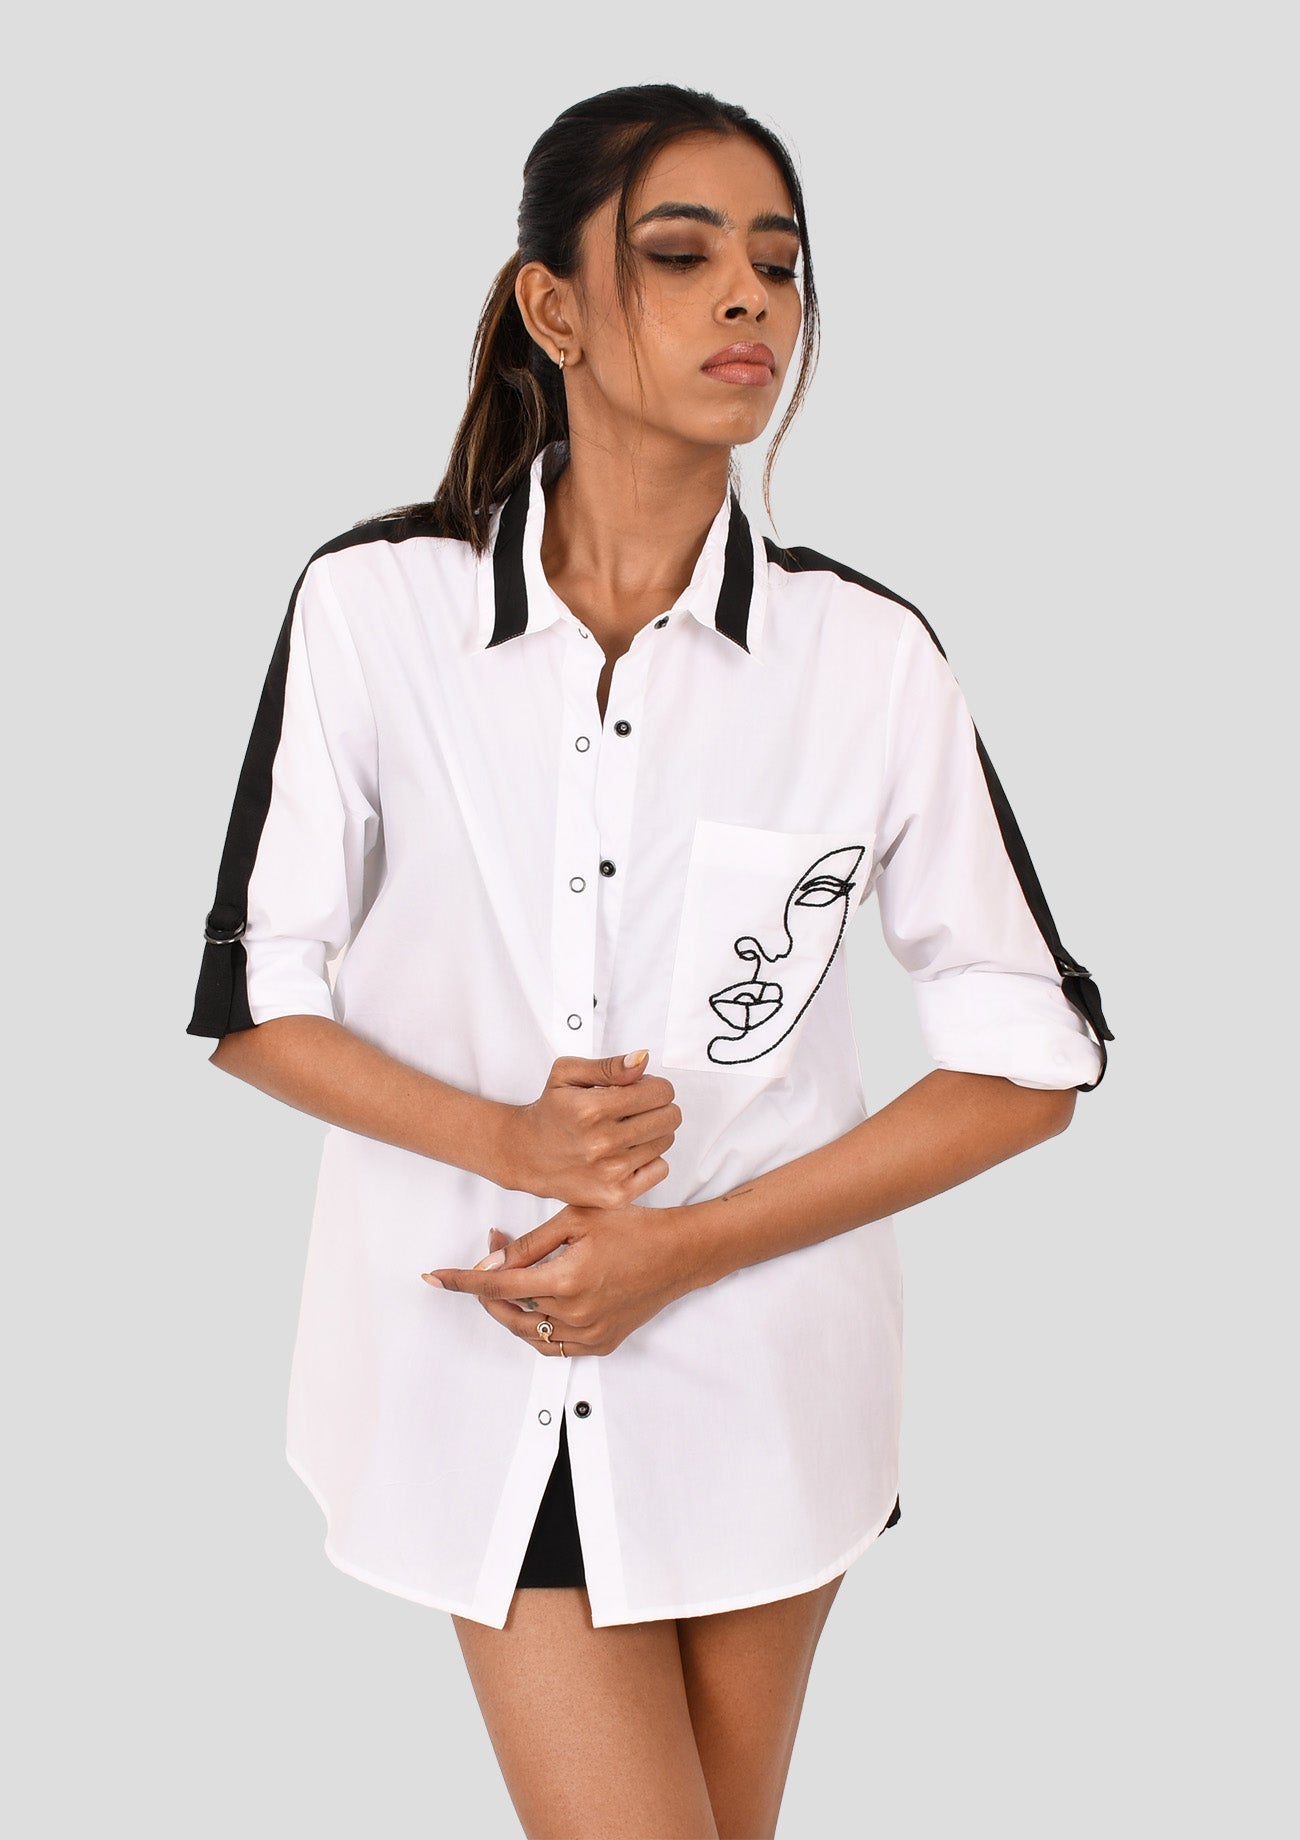 White Cotton Shirt With Embroidered Pocket And Black Tape